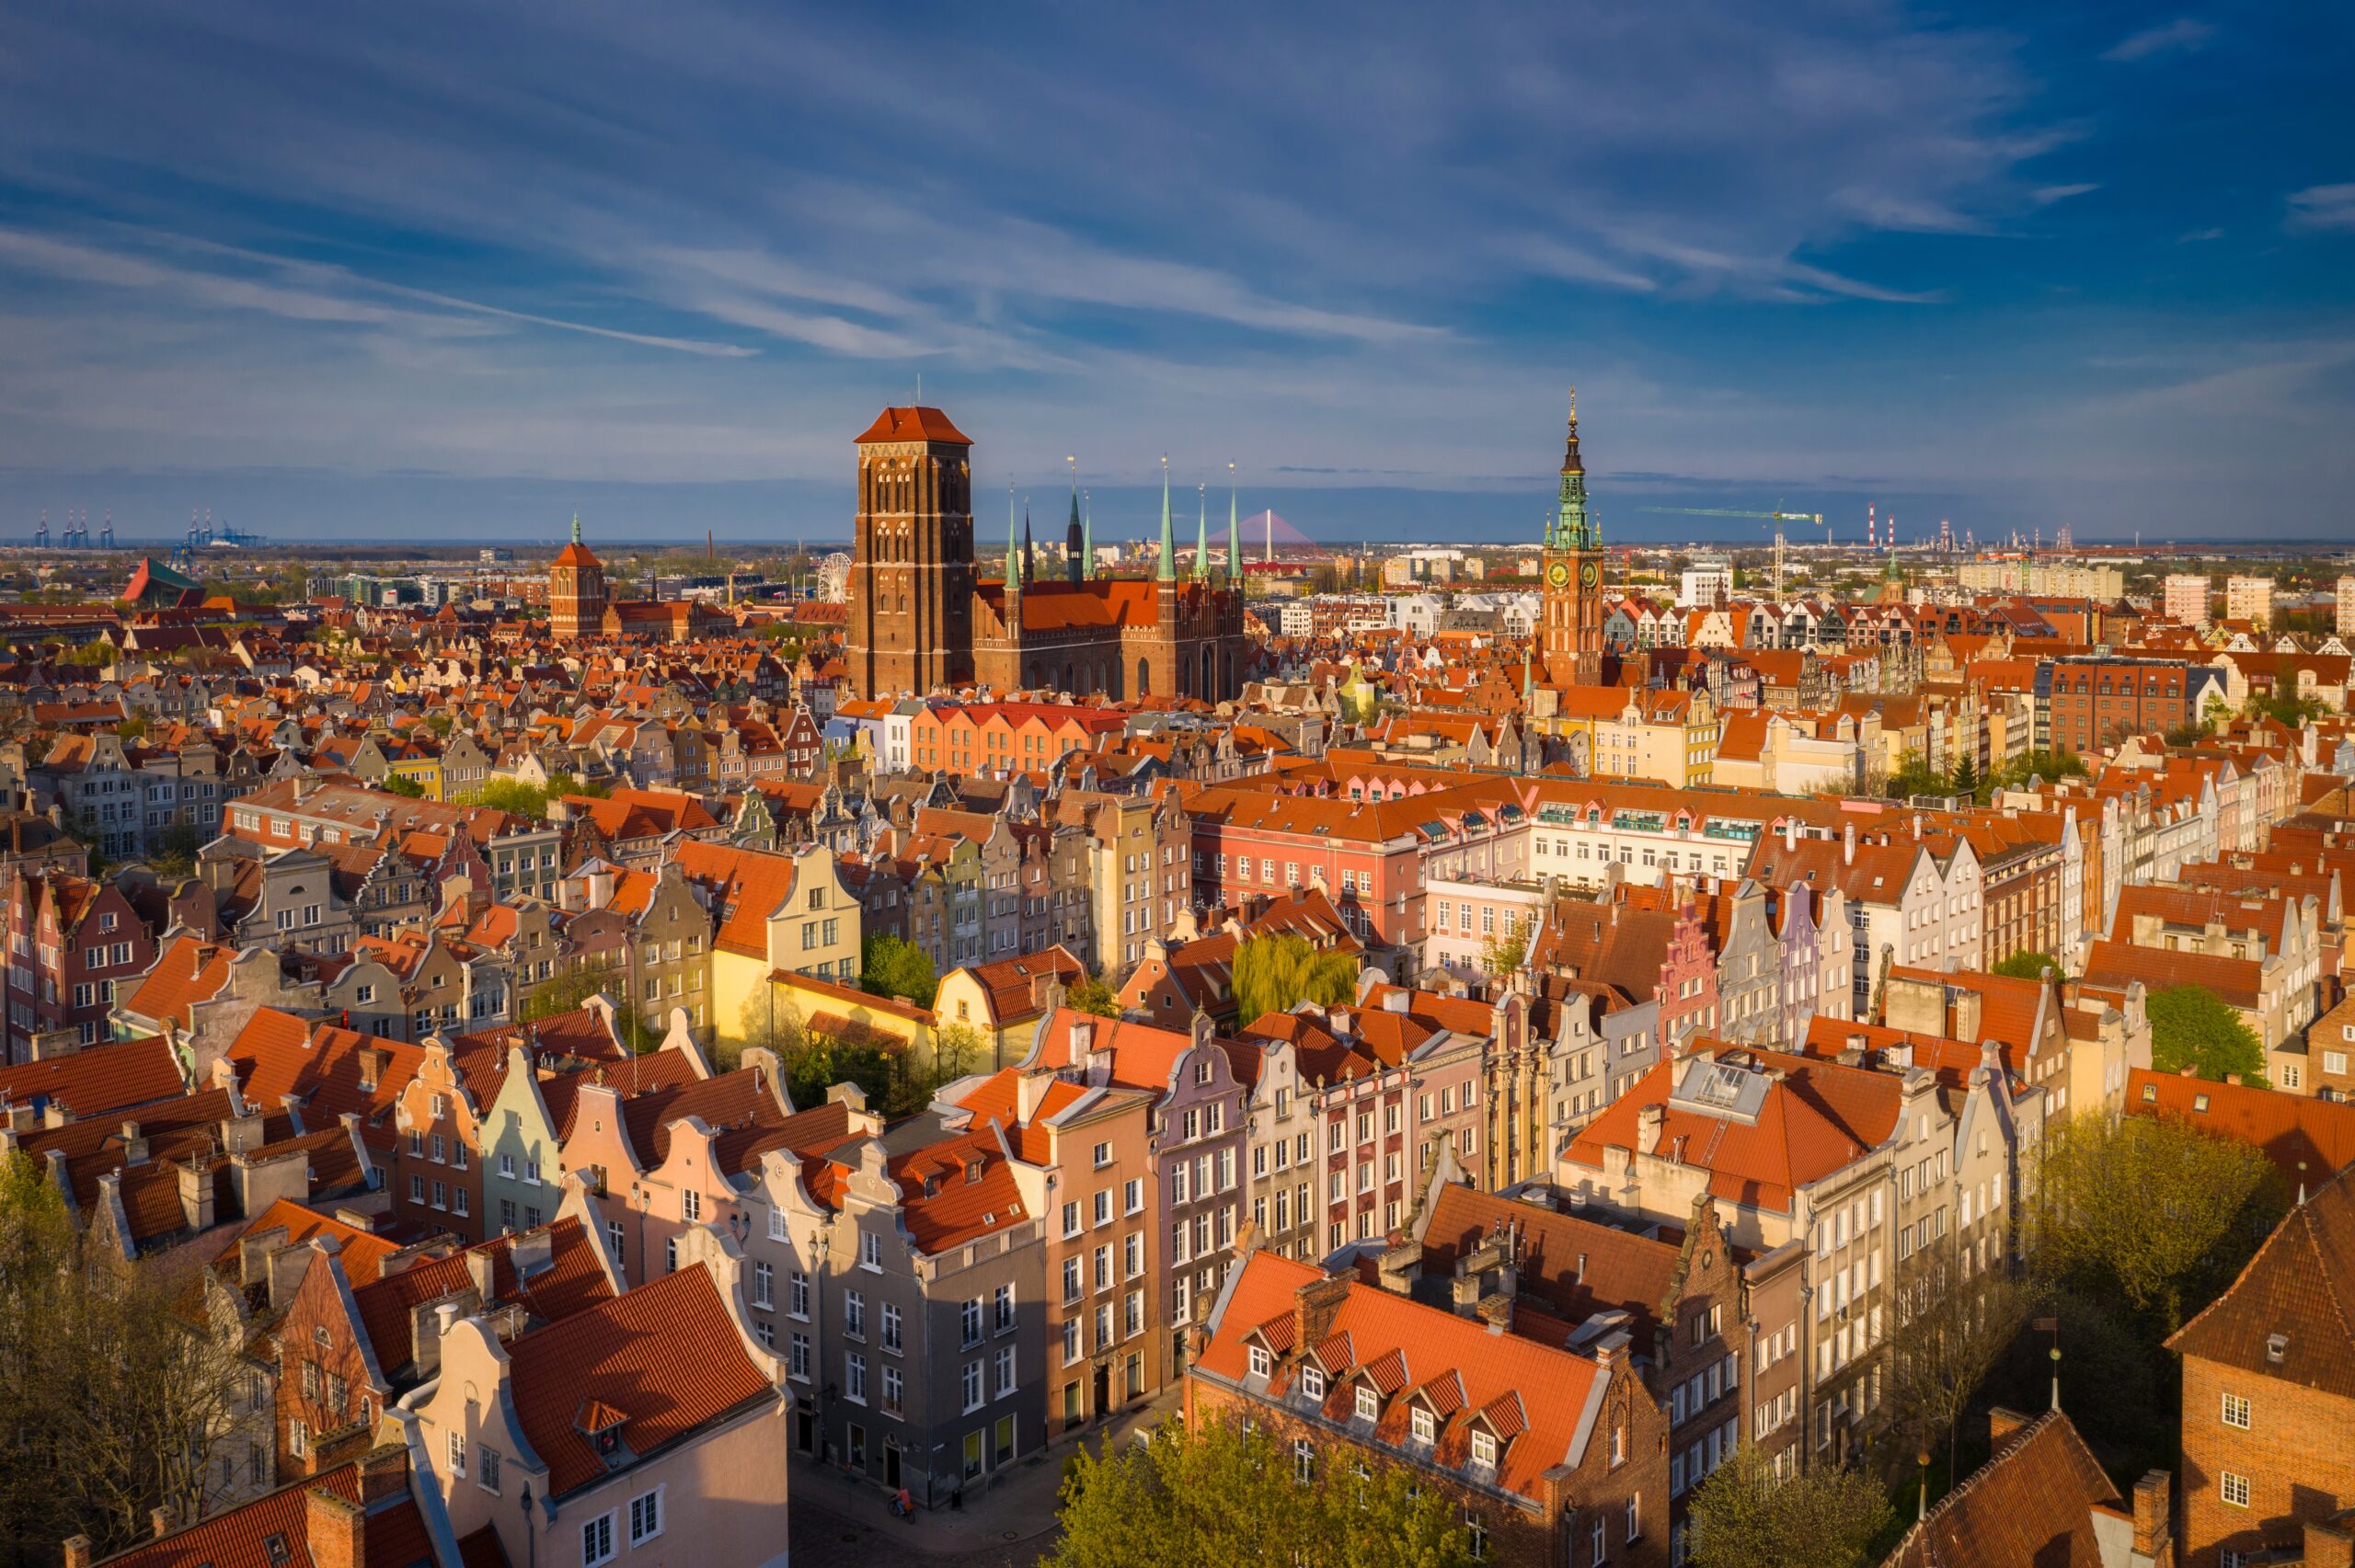 Wroclaw City View